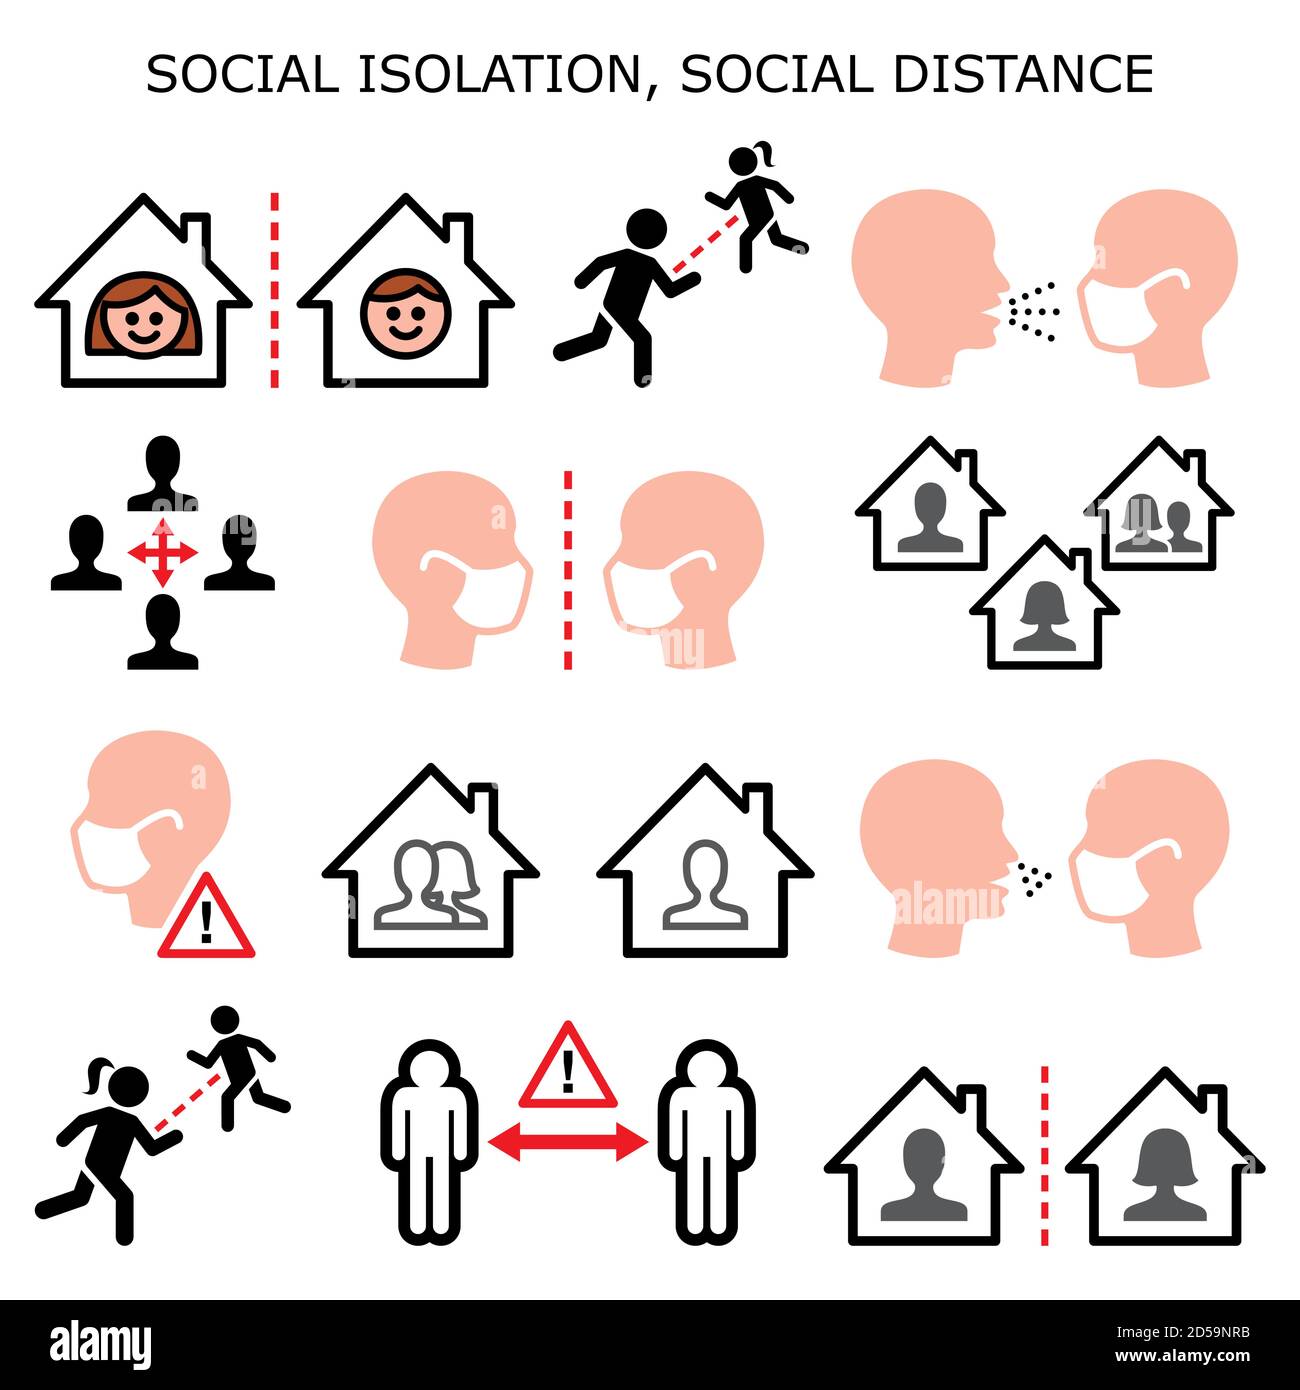 Social isolation, social distance, people on quarantine isolated at home during pandemic or epidemic vector color icons set - flattering a curve conce Stock Vector